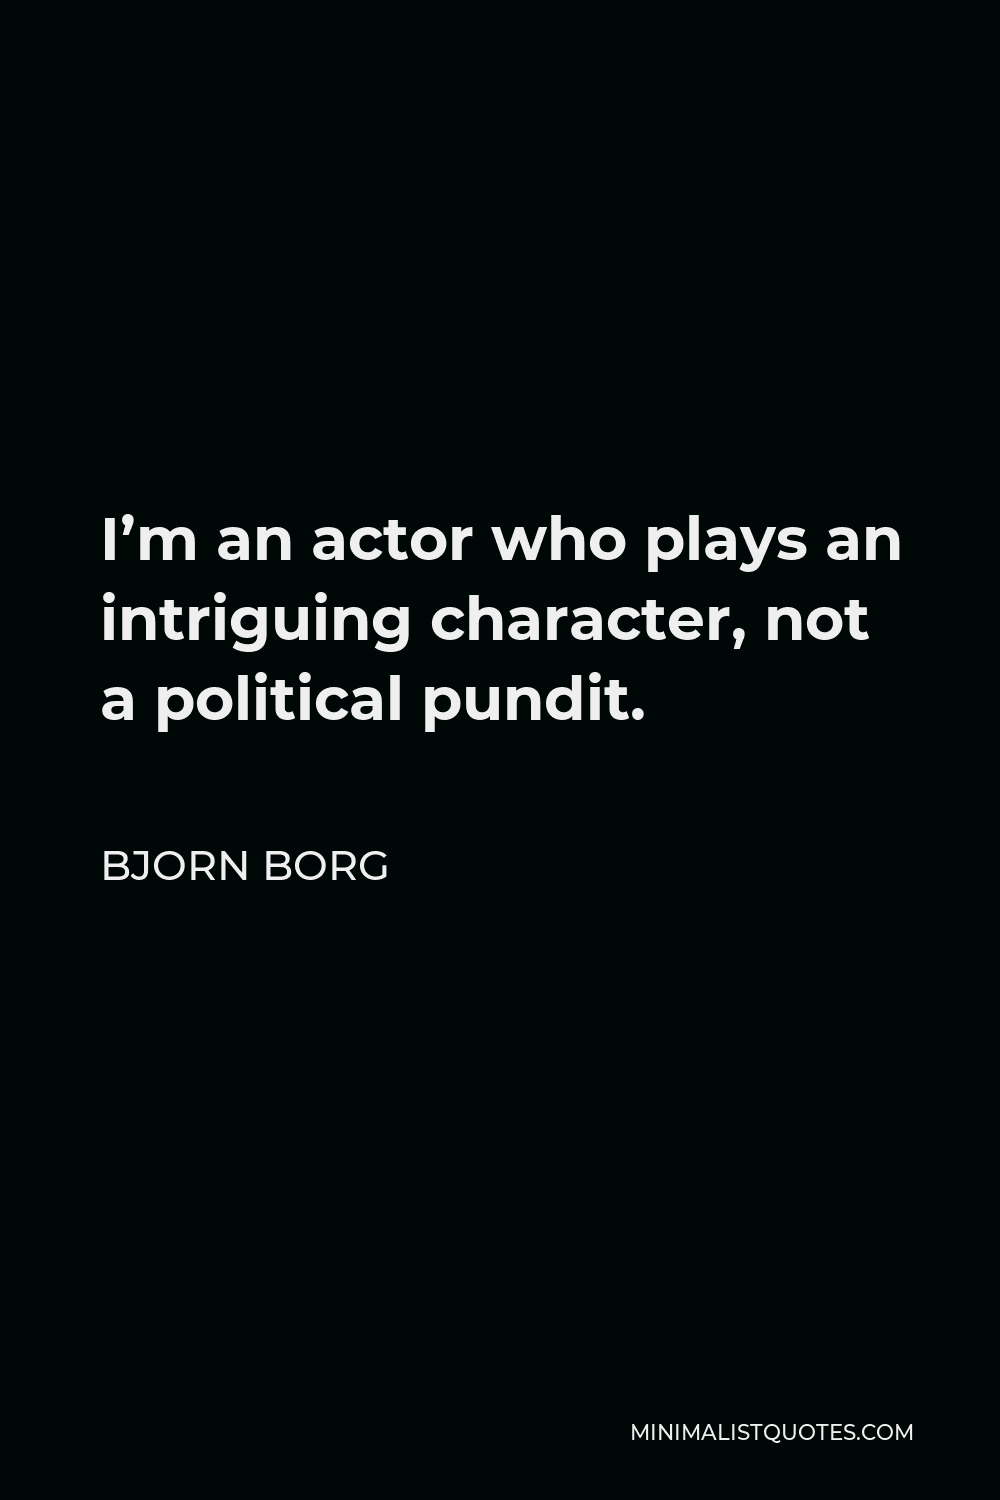 Bjorn Borg Quote - I’m an actor who plays an intriguing character, not a political pundit.